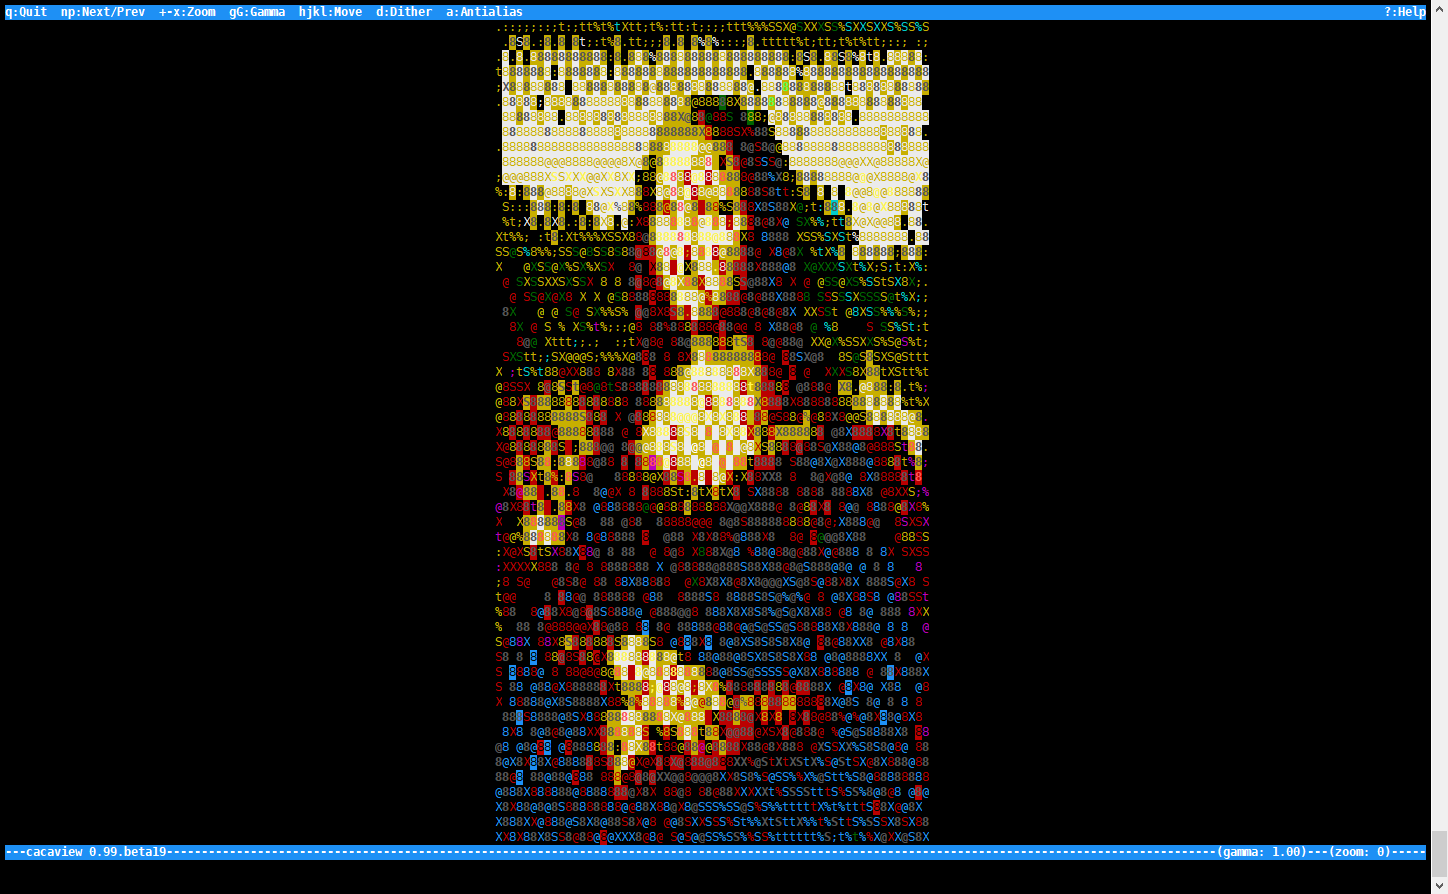 mona lisa rendered by cacaview